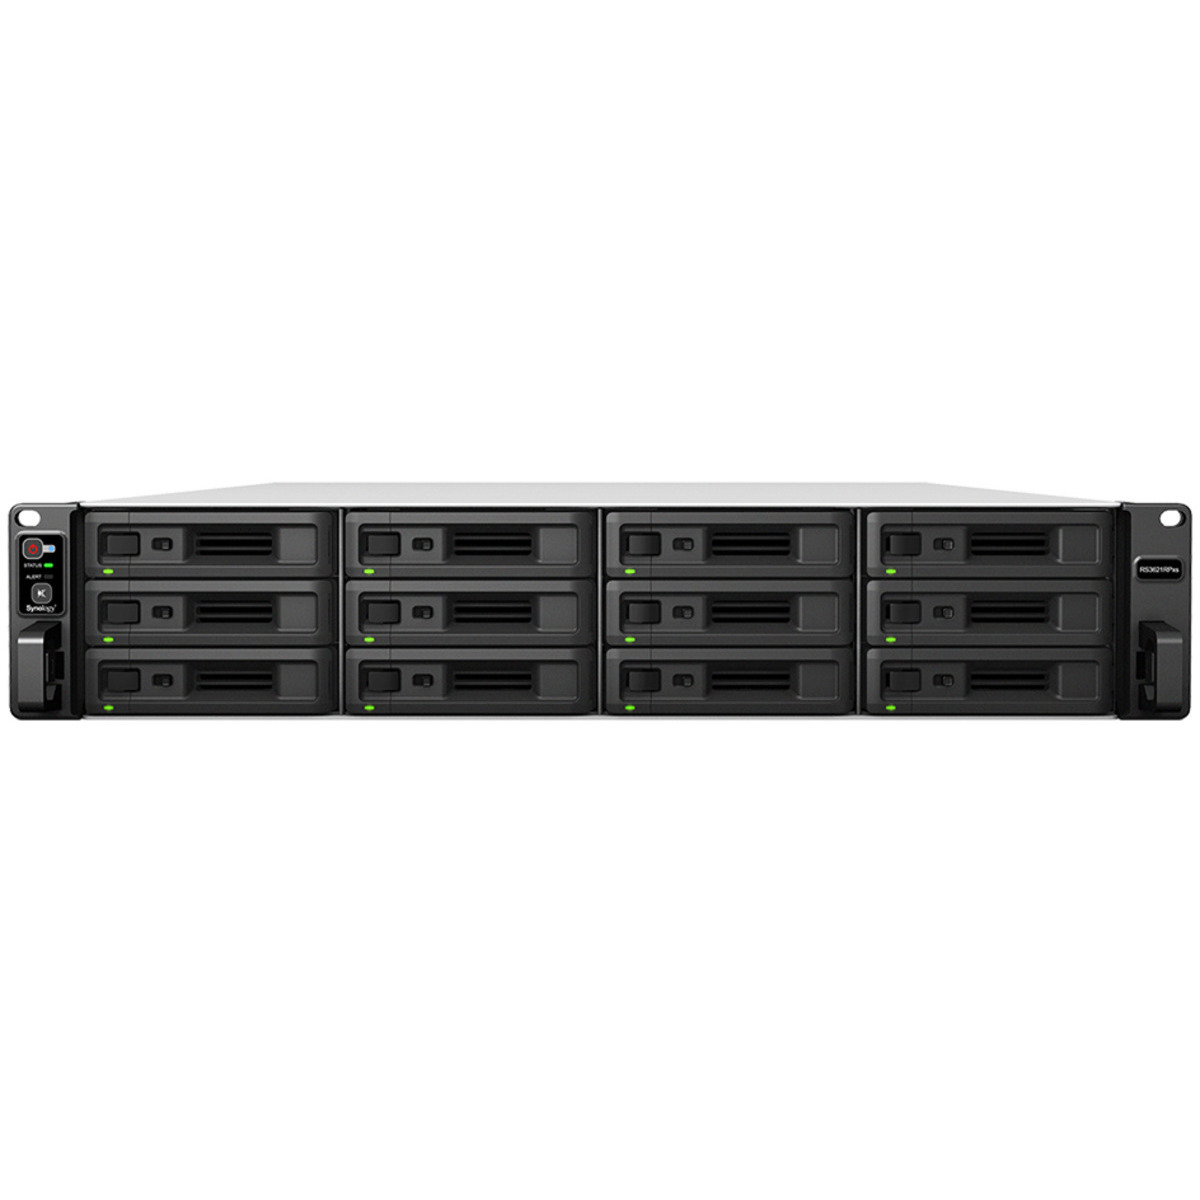 Synology RackStation RS3621RPxs 18tb 12-Bay RackMount Large Business / Enterprise NAS - Network Attached Storage Device 9x2tb Sandisk Ultra 3D SDSSDH3-2T00 2.5 560/520MB/s SATA 6Gb/s SSD CONSUMER Class Drives Installed - Burn-In Tested RackStation RS3621RPxs